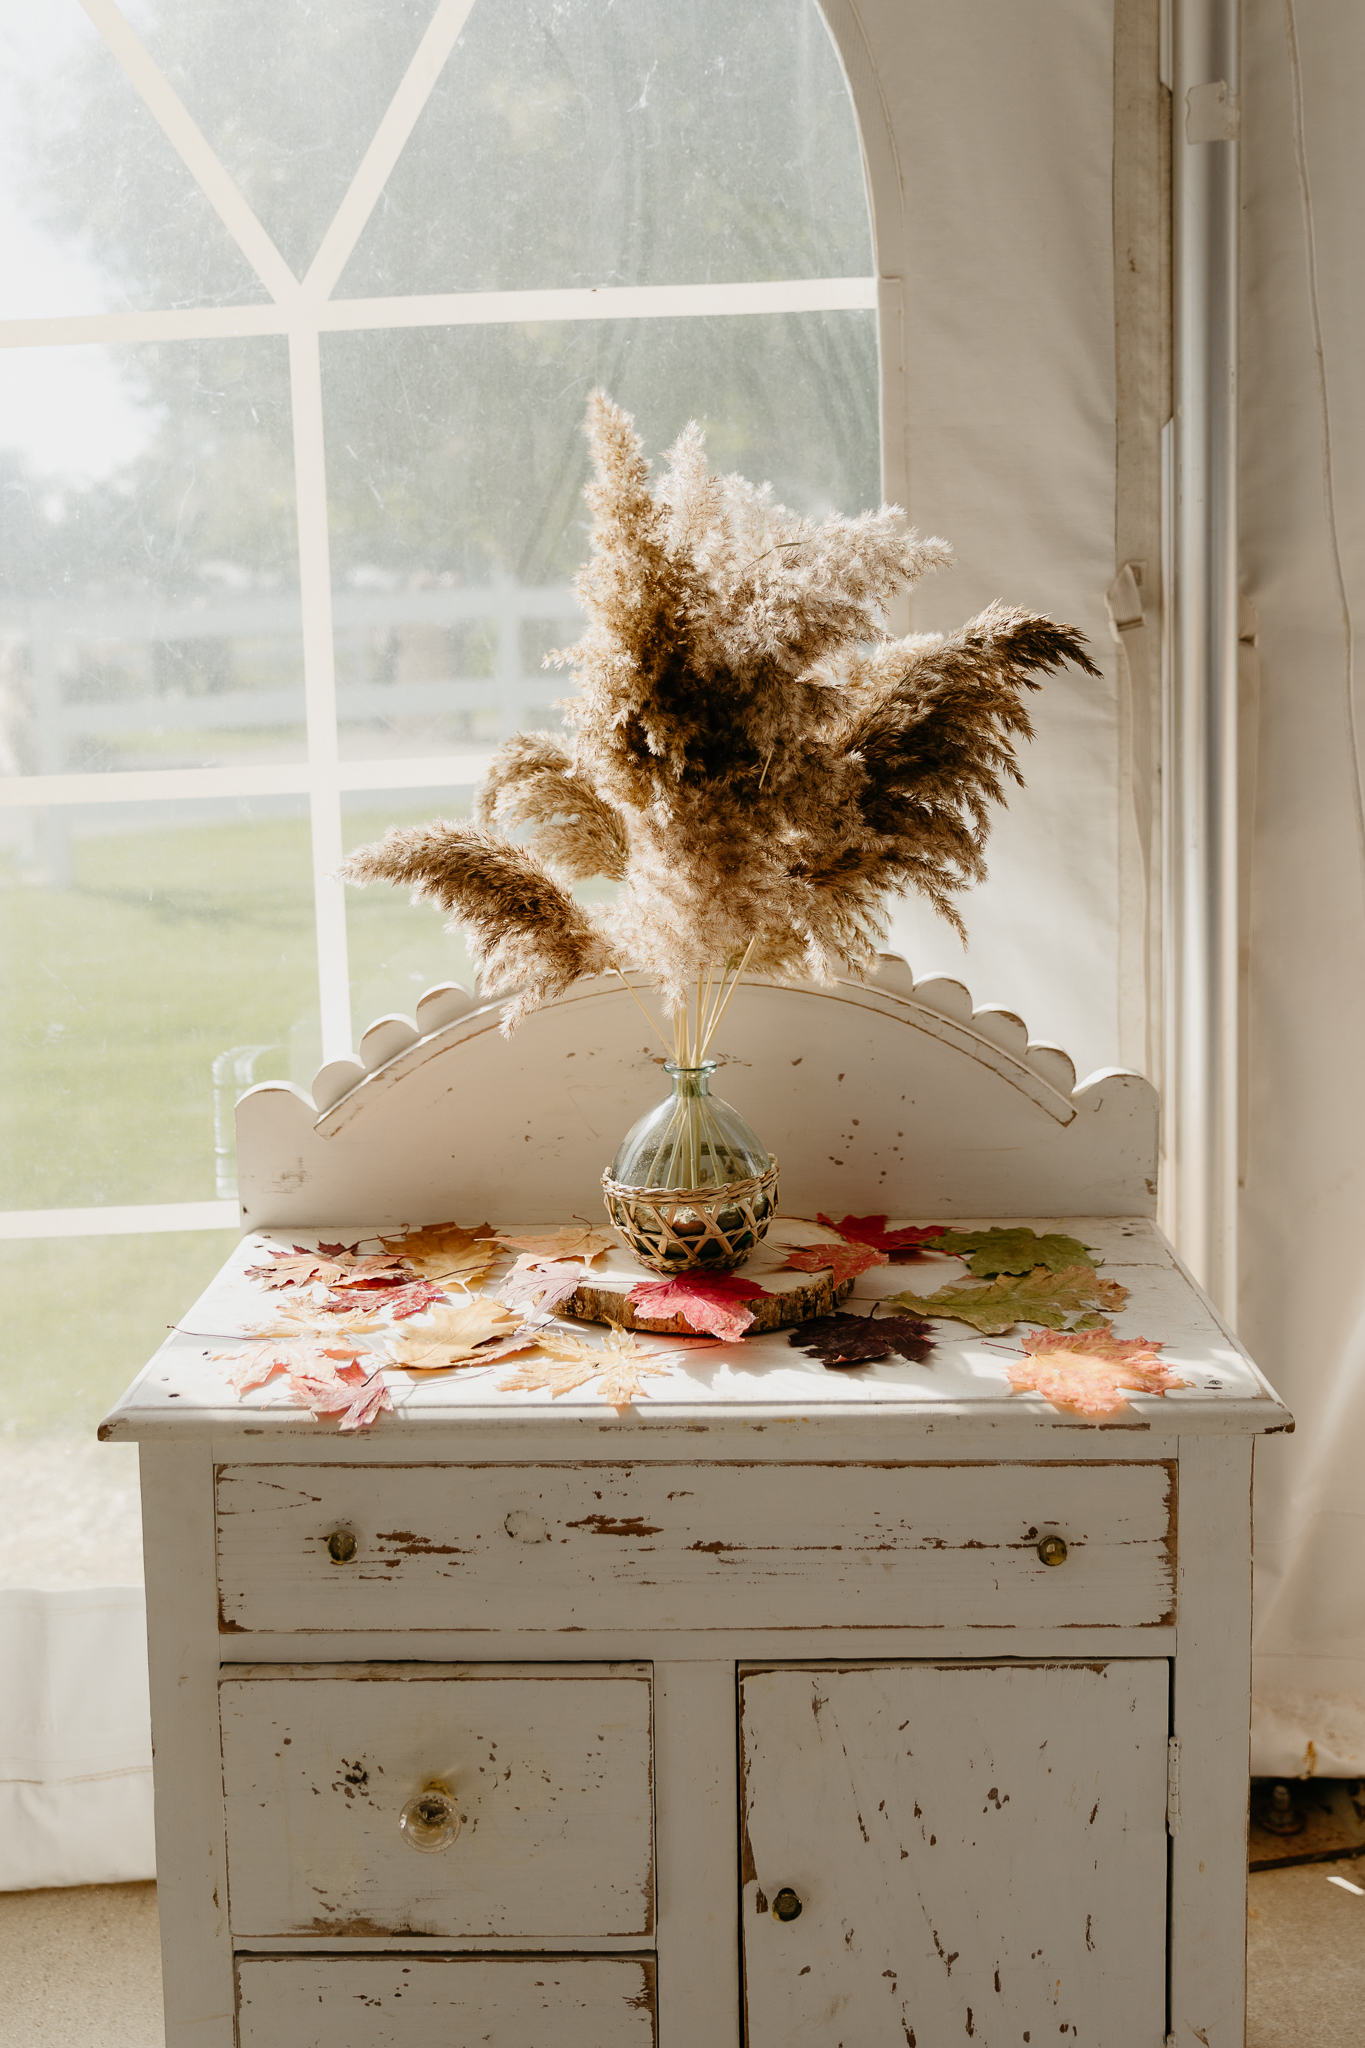 Wedding decorations and guest book on a table for a fall wedding